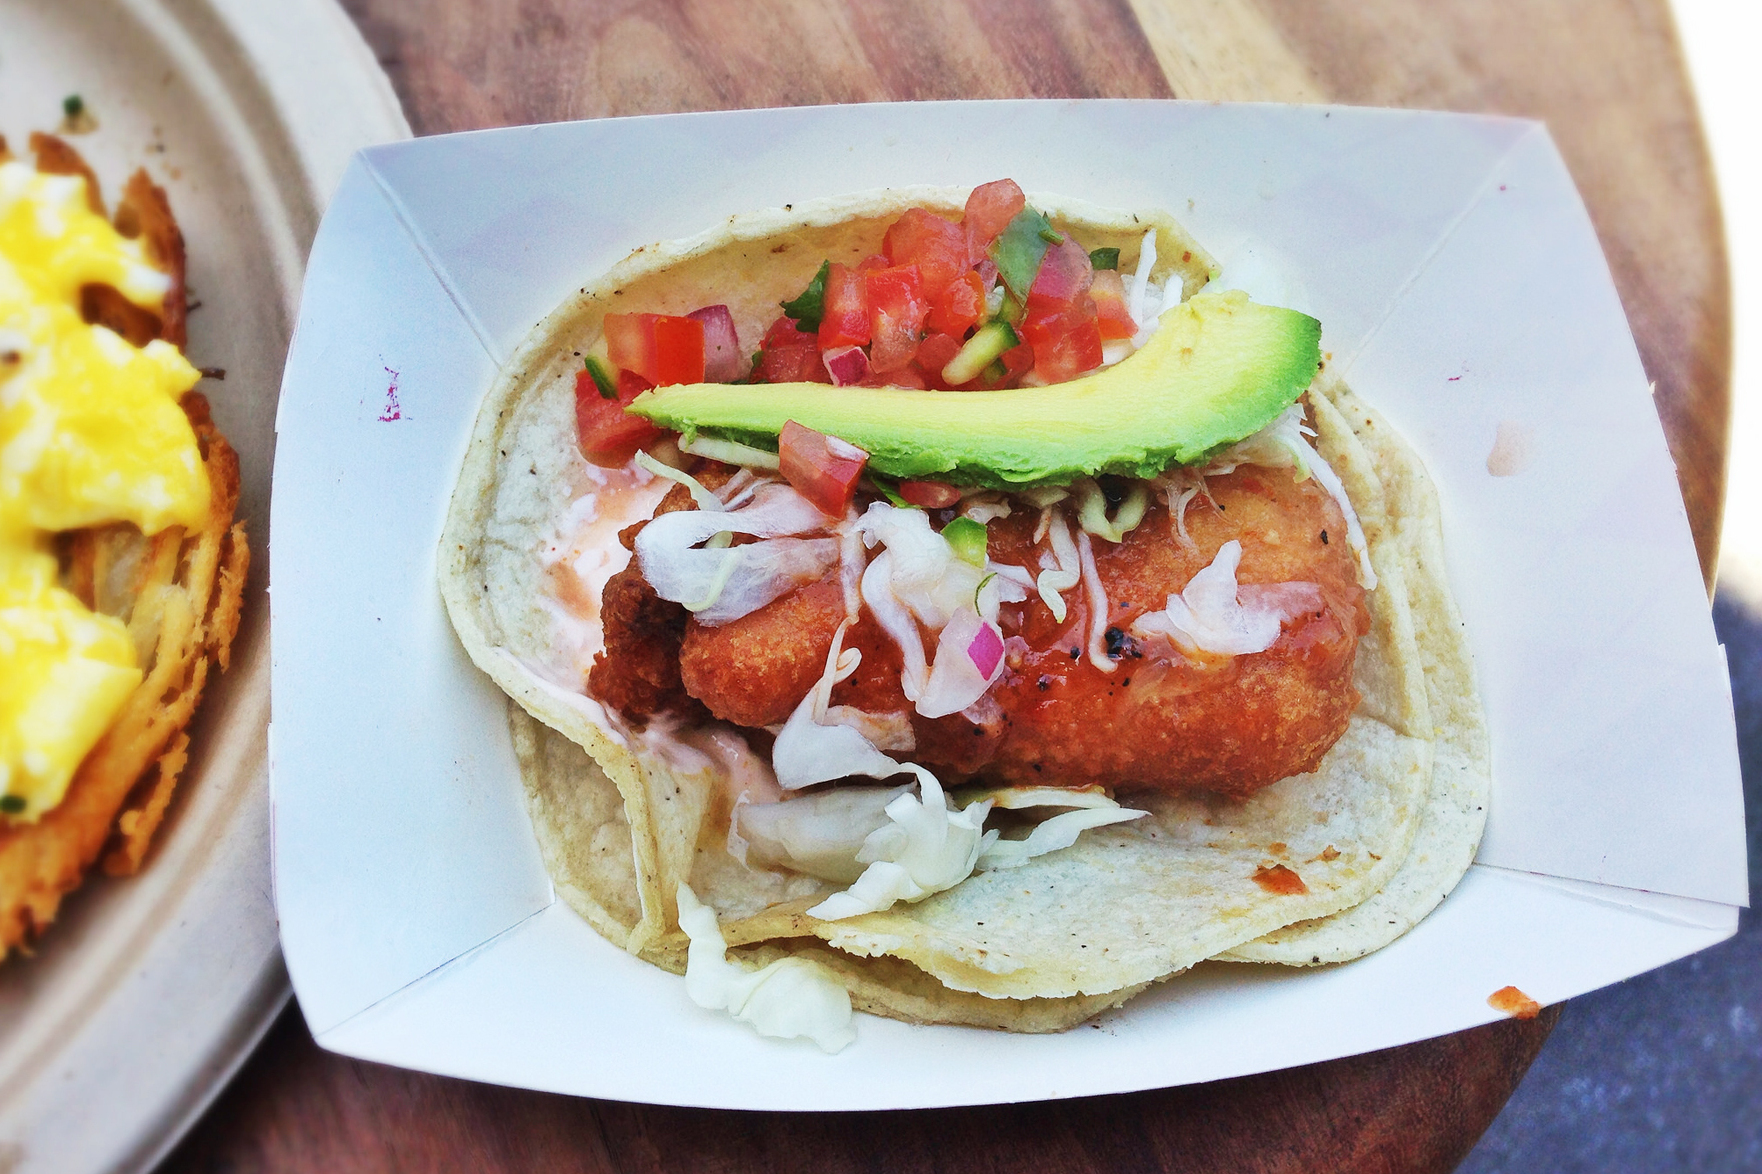 Take a bite — or or maybe don't — of this beer-battered mako shark taco with cabbage, pico de gallo, avocado, arbol chile and cream from Guerilla Tacos in Los Angeles. Photo: T. Tseng/Flickr